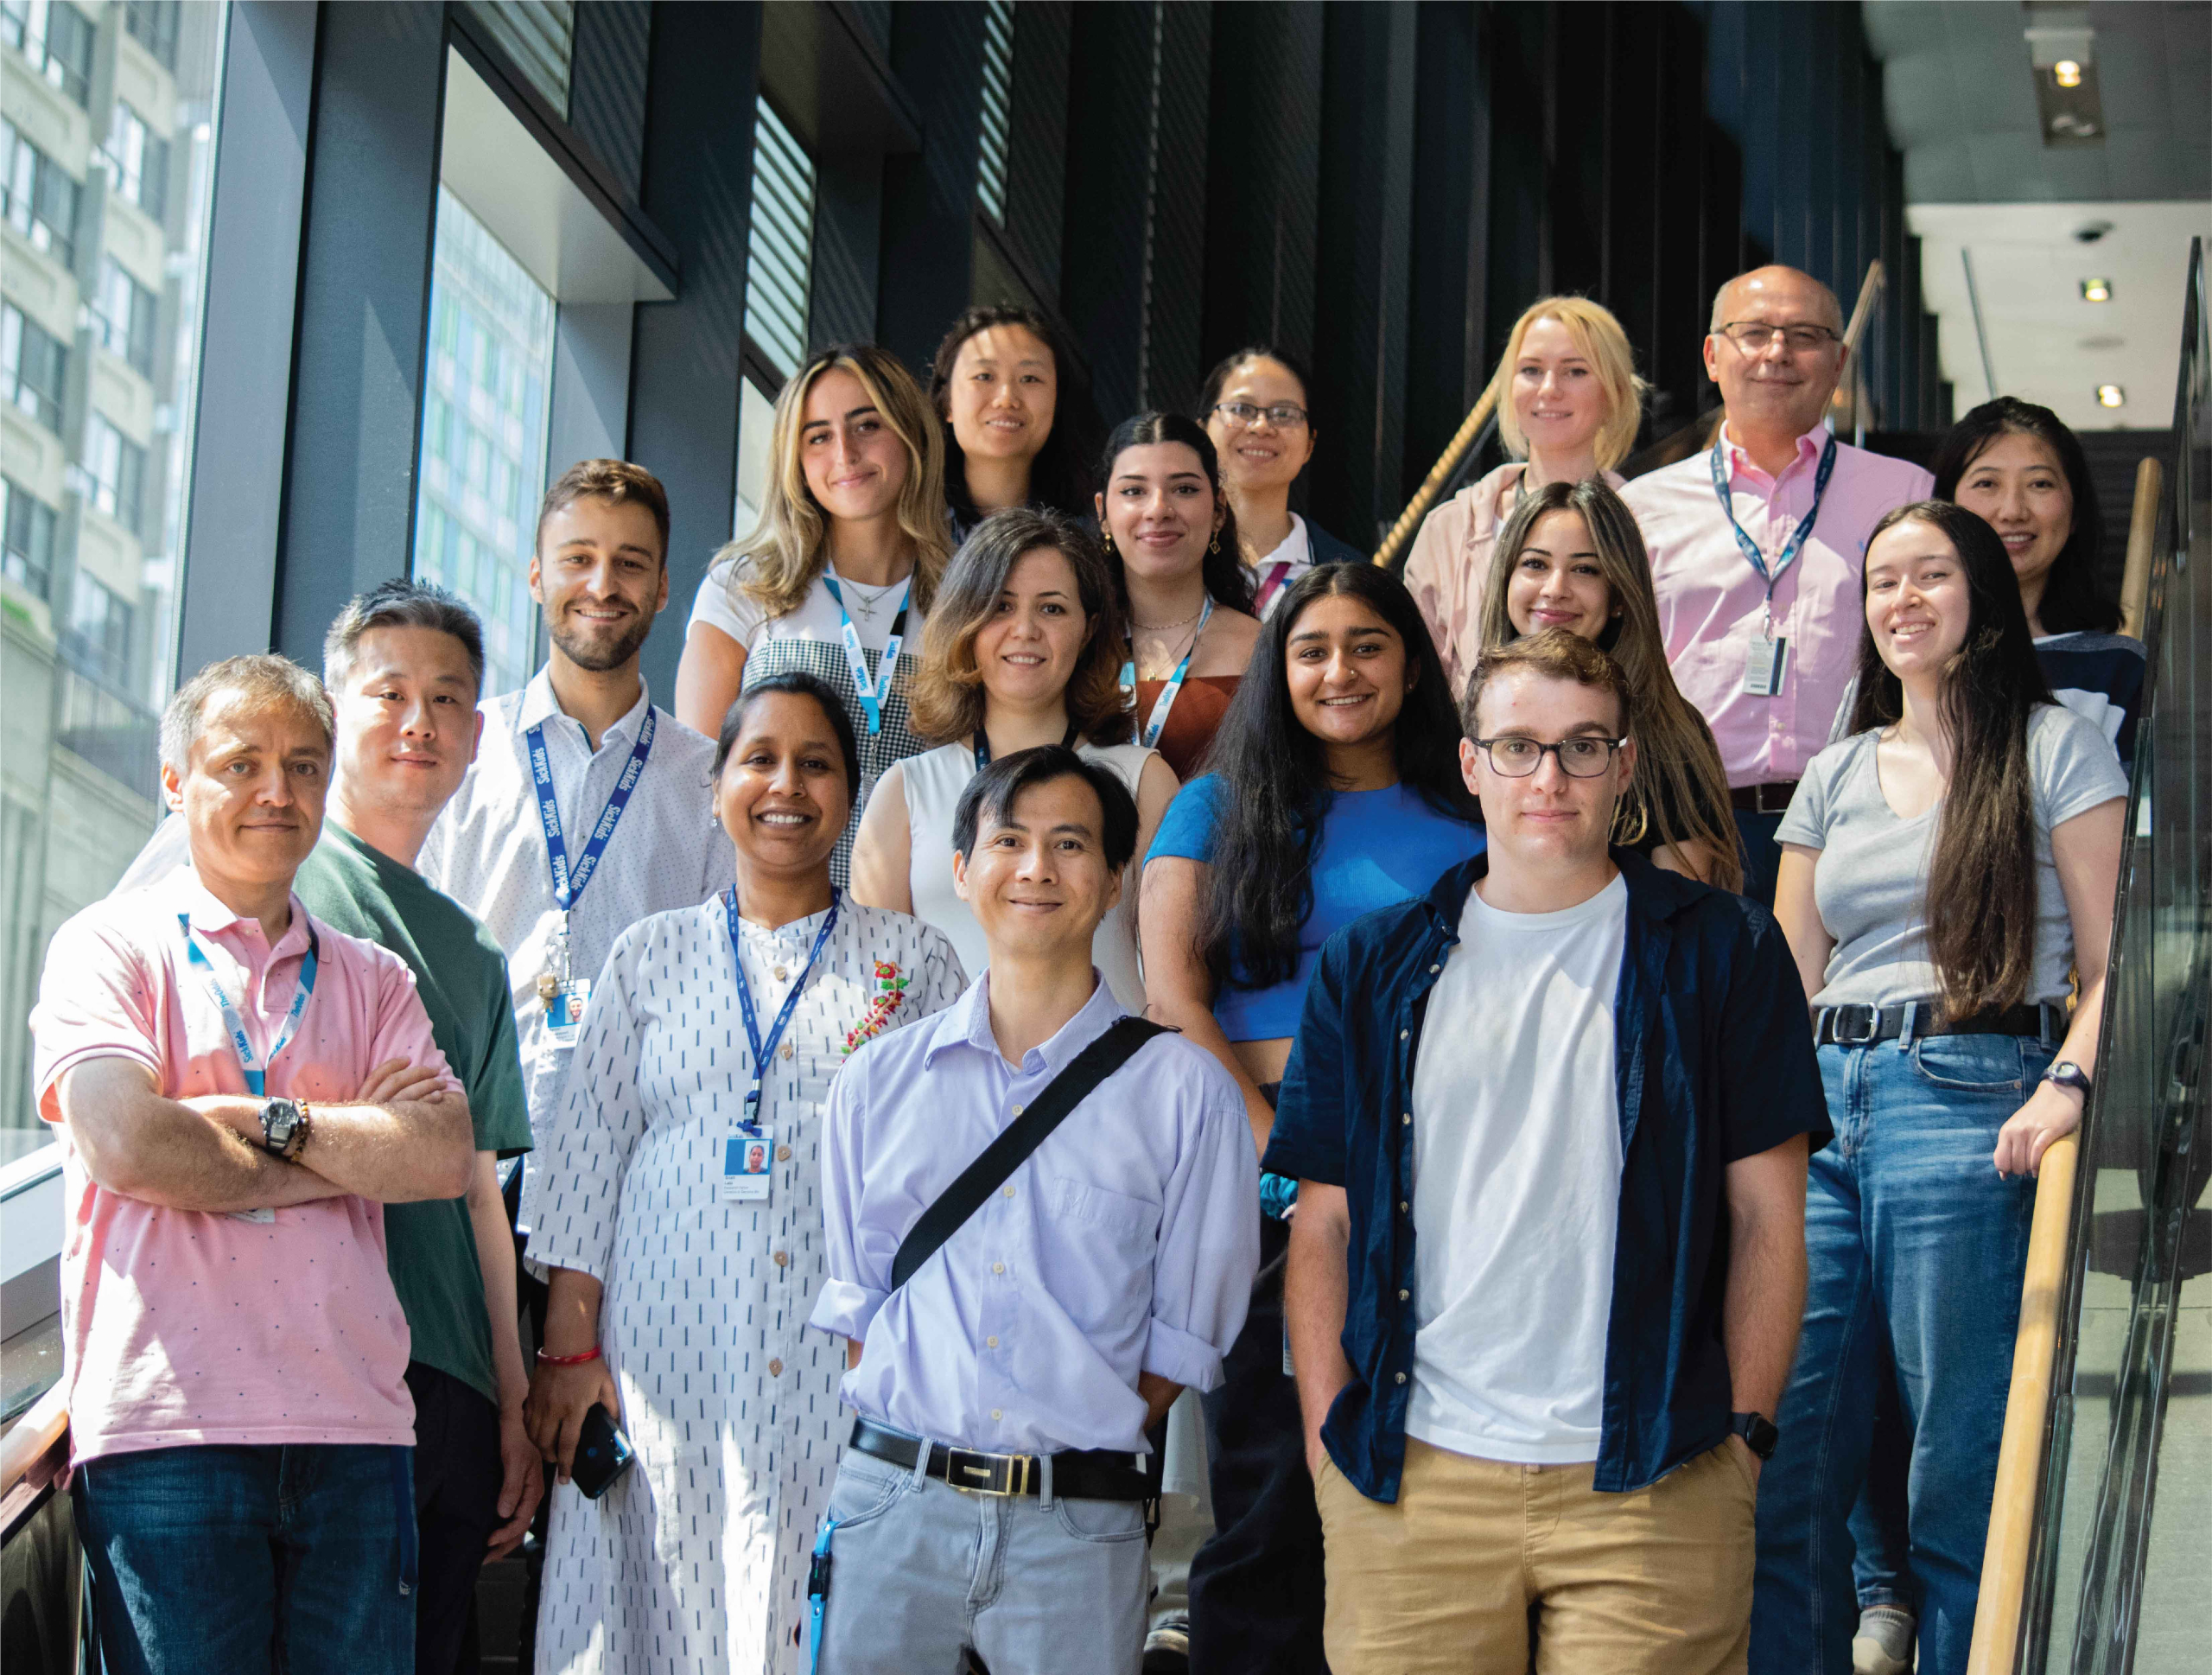 A group image of all members of the Ivakine Lab posing for a photo on a staircase in the PGCRL